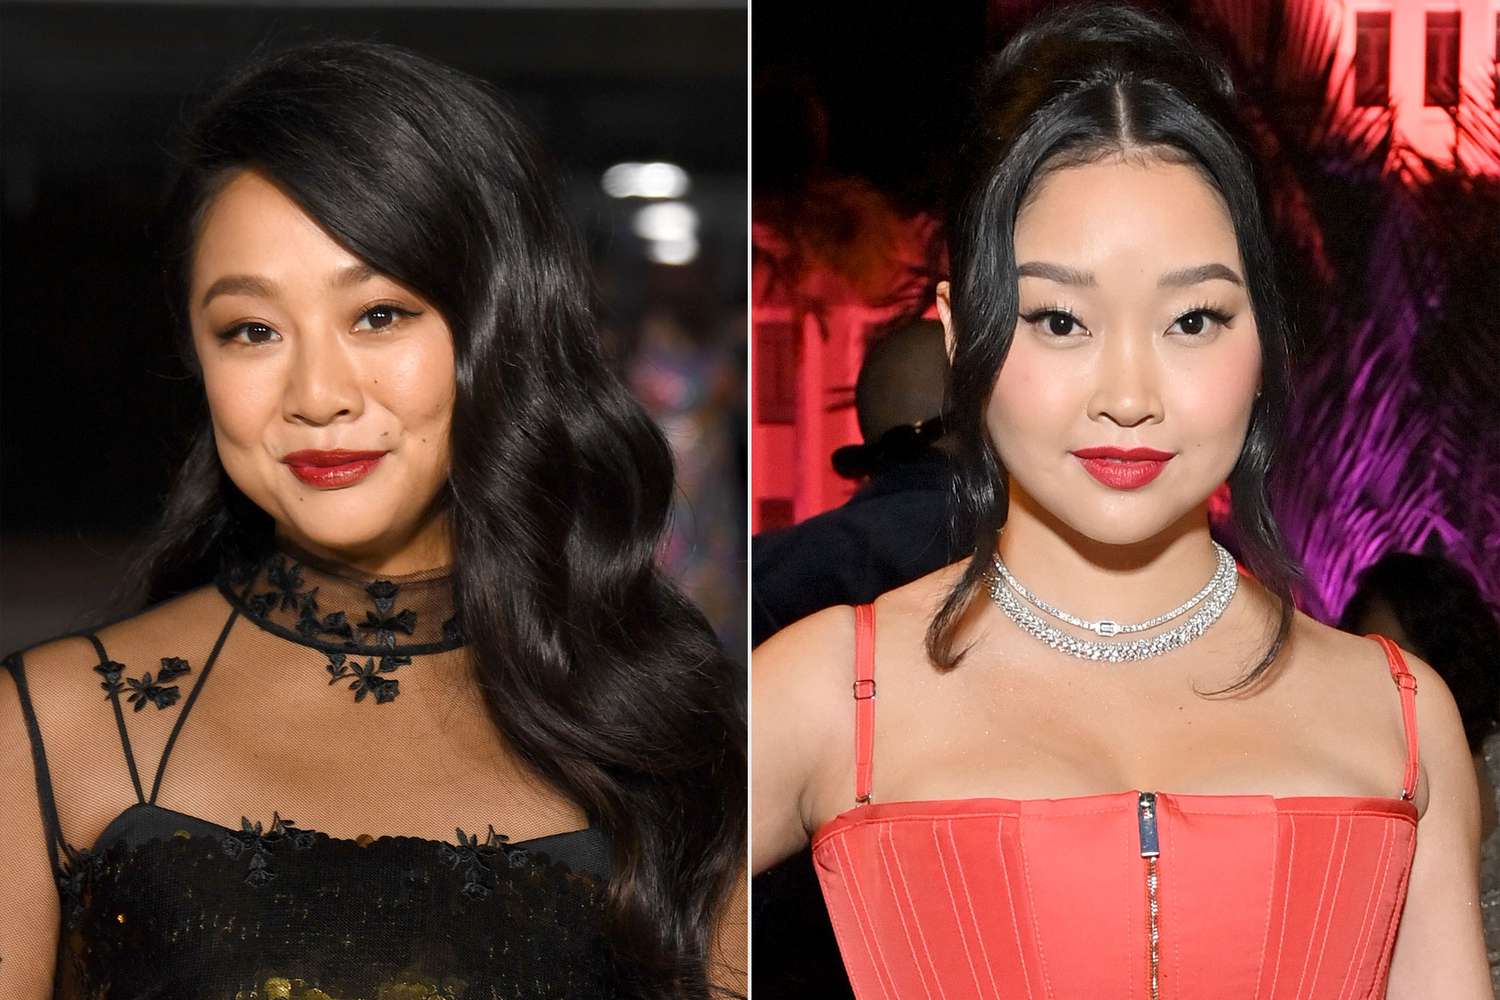 Stephanie Hsu attends the 2nd Annual Academy Museum Gala at Academy Museum of Motion Pictures on October 15, 2022 in Los Angeles, California. ; Lana Condor attends the 2022 Vanity Fair Oscar Party hosted by Radhika Jones at Wallis Annenberg Center for the Performing Arts on March 27, 2022 in Beverly Hills, California.